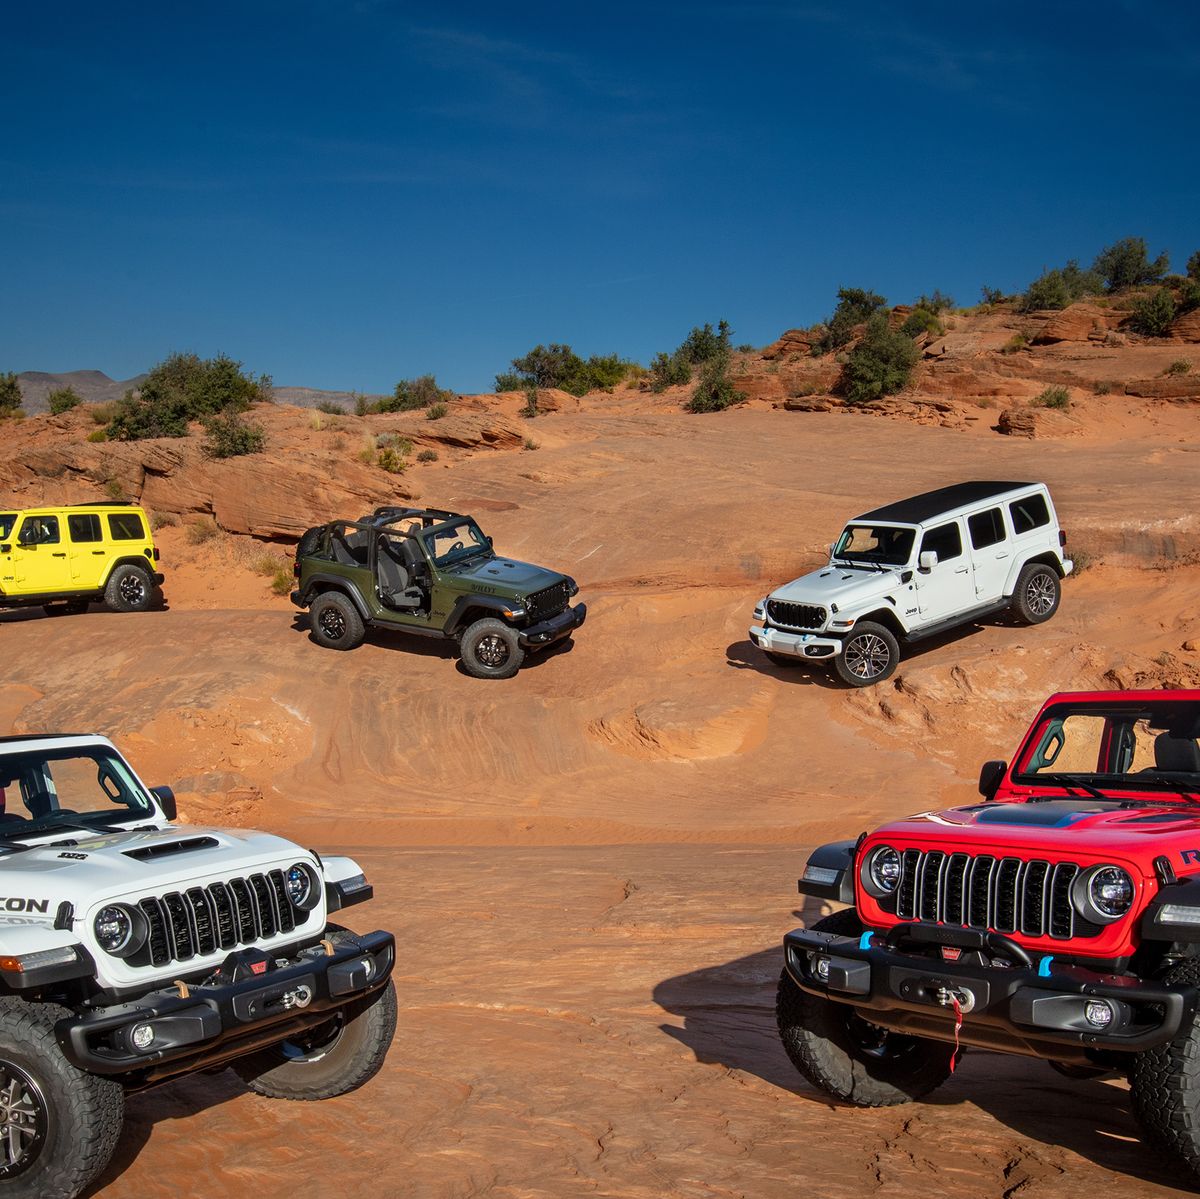 Jeep Wrangler Can Make It in the Modern World